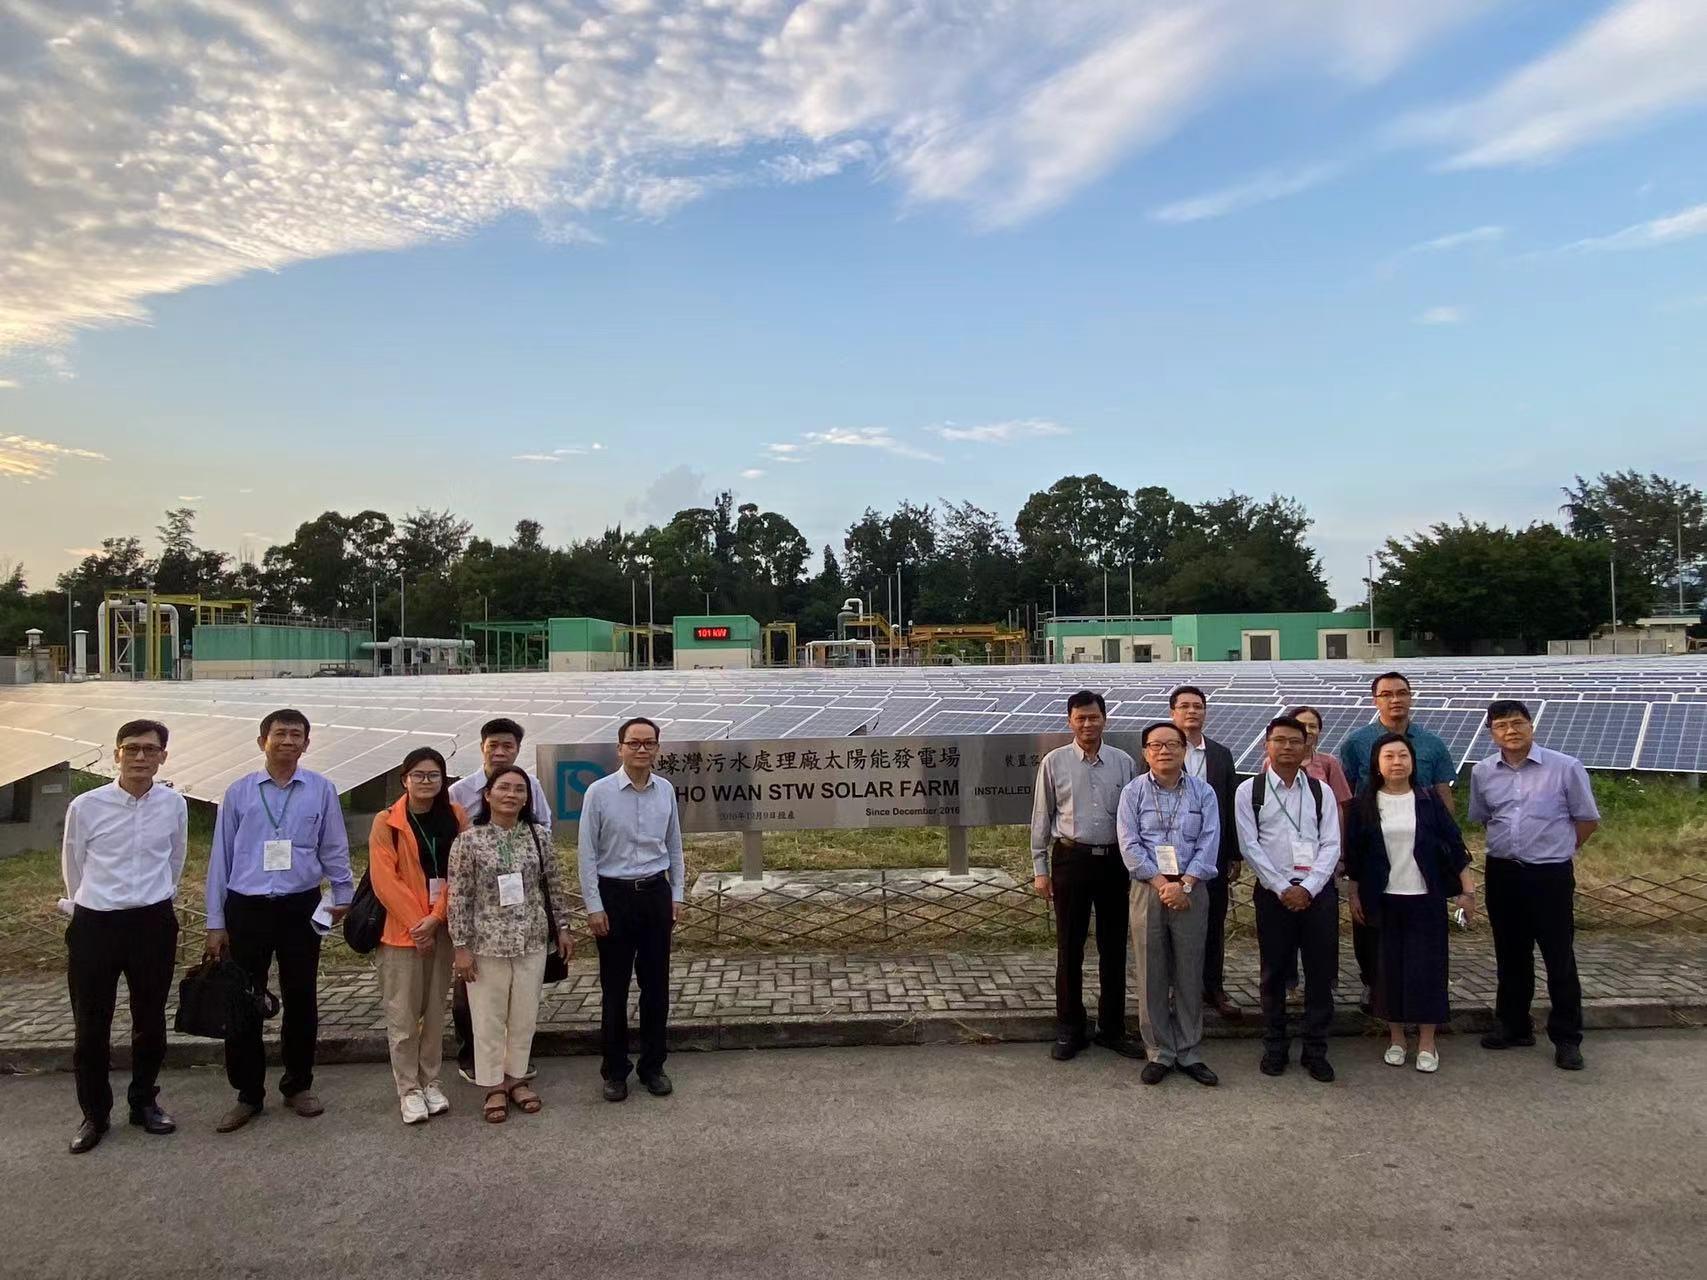 The Environmental Protection Department (EPD) arranged delegations from the Belt and Road (B&R) countries (namely Laos, Vietnam and Myanmar) and representatives from the Research Center for Eco-Environmental Sciences of the Chinese Academy of Sciences attending Eco Expo Asia to visit local aquaculture farms, water treatment works and sewage treatment facilities. Photo shows the B&R delegations visiting the Drainage Services Department 's Siu Ho Wan Sewage Treatment Works and its solar farm with EPD officers on October 27.